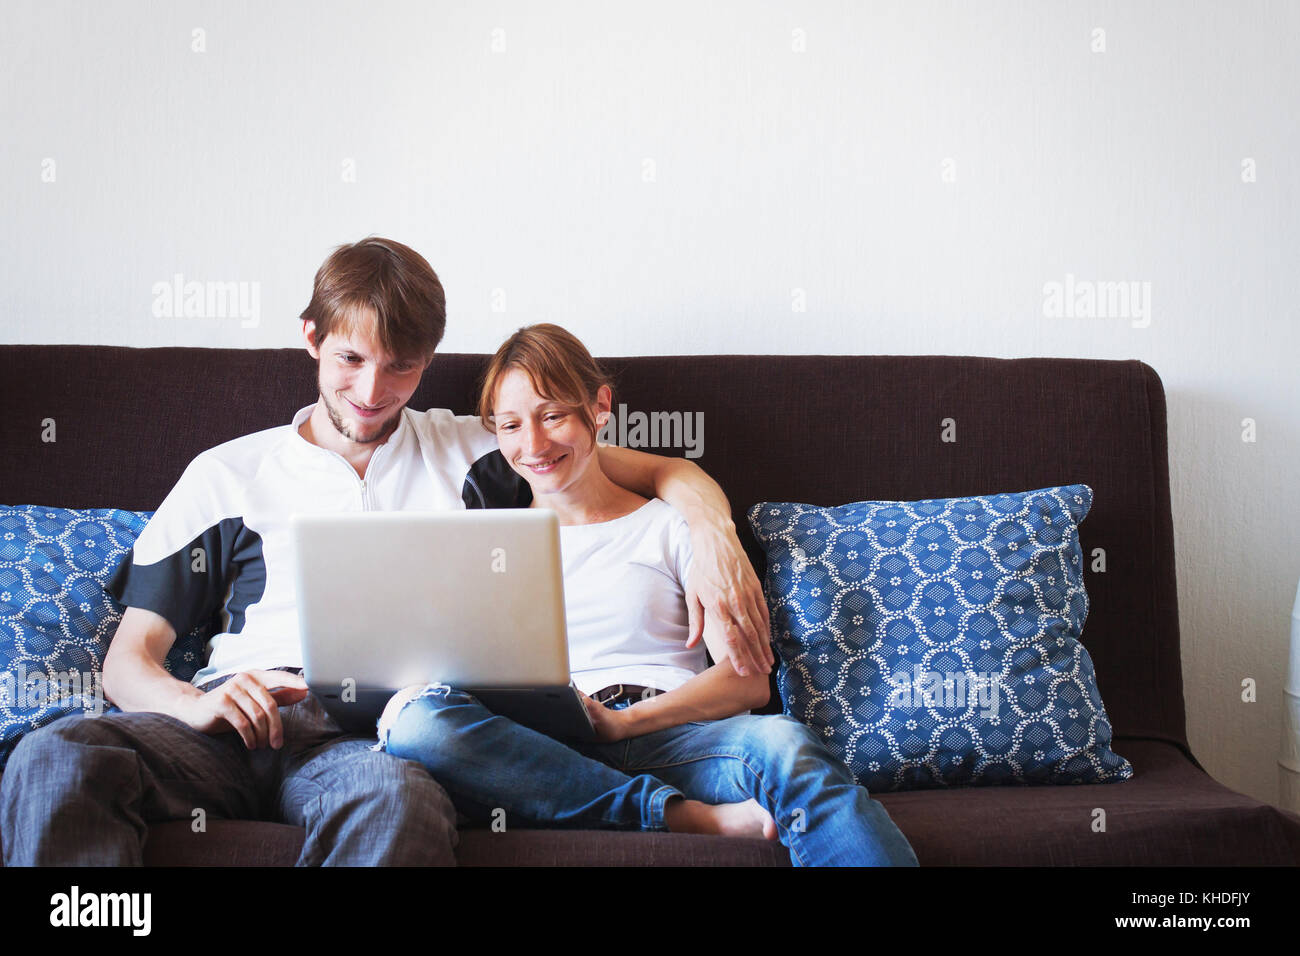 young couple looking at computer and smiling, family sitting on the couch at home Stock Photo